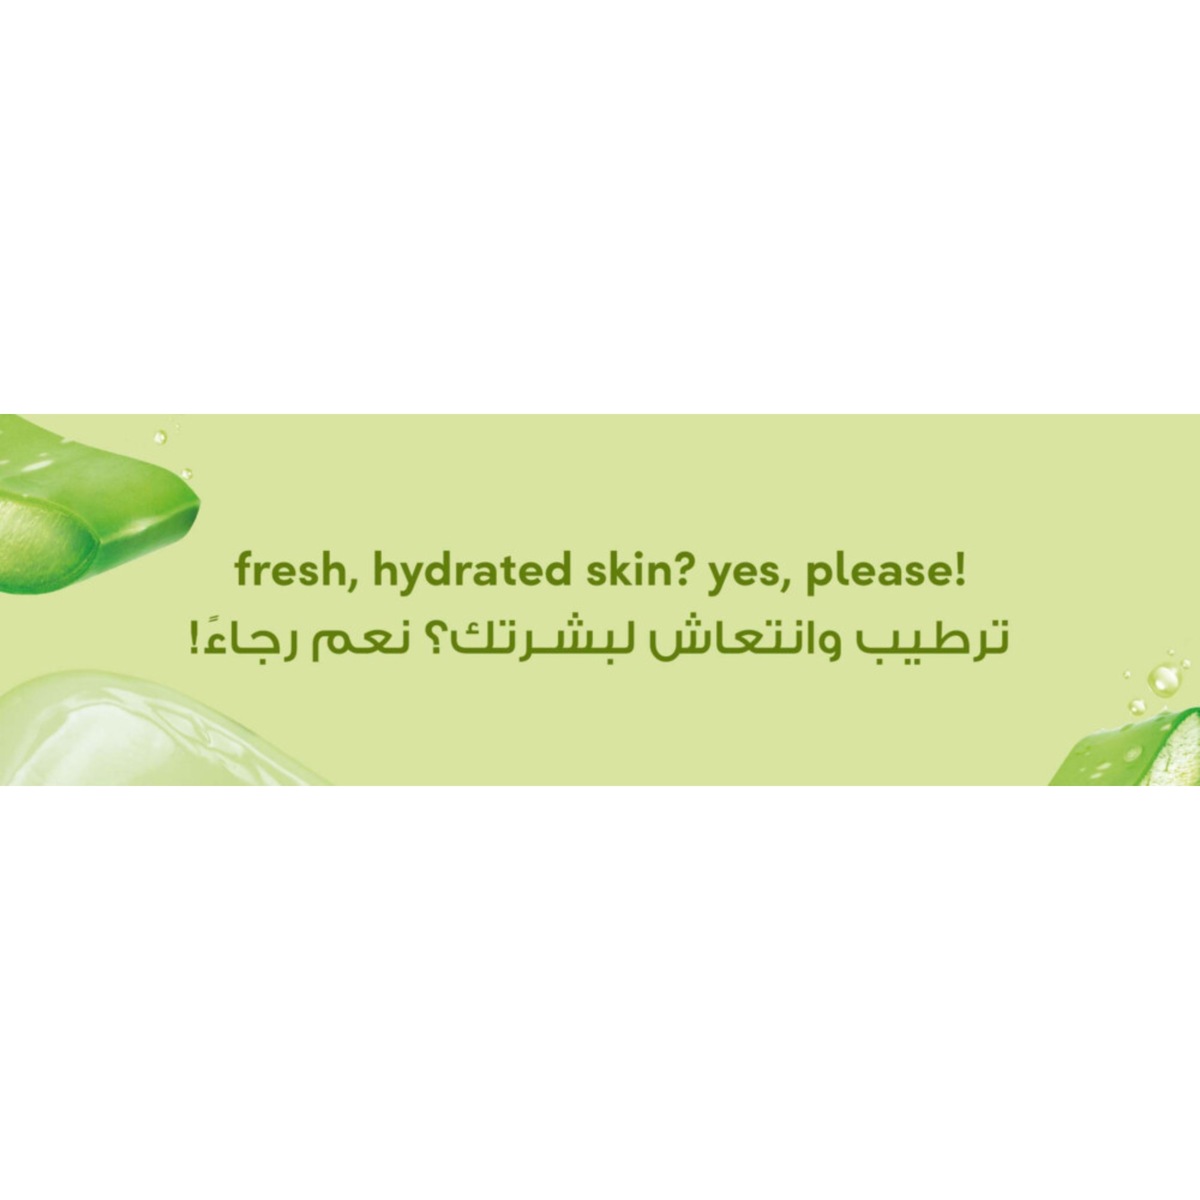 Pond's Healthy Hydration Aloe Vera Jelly Cleanser, 100 g